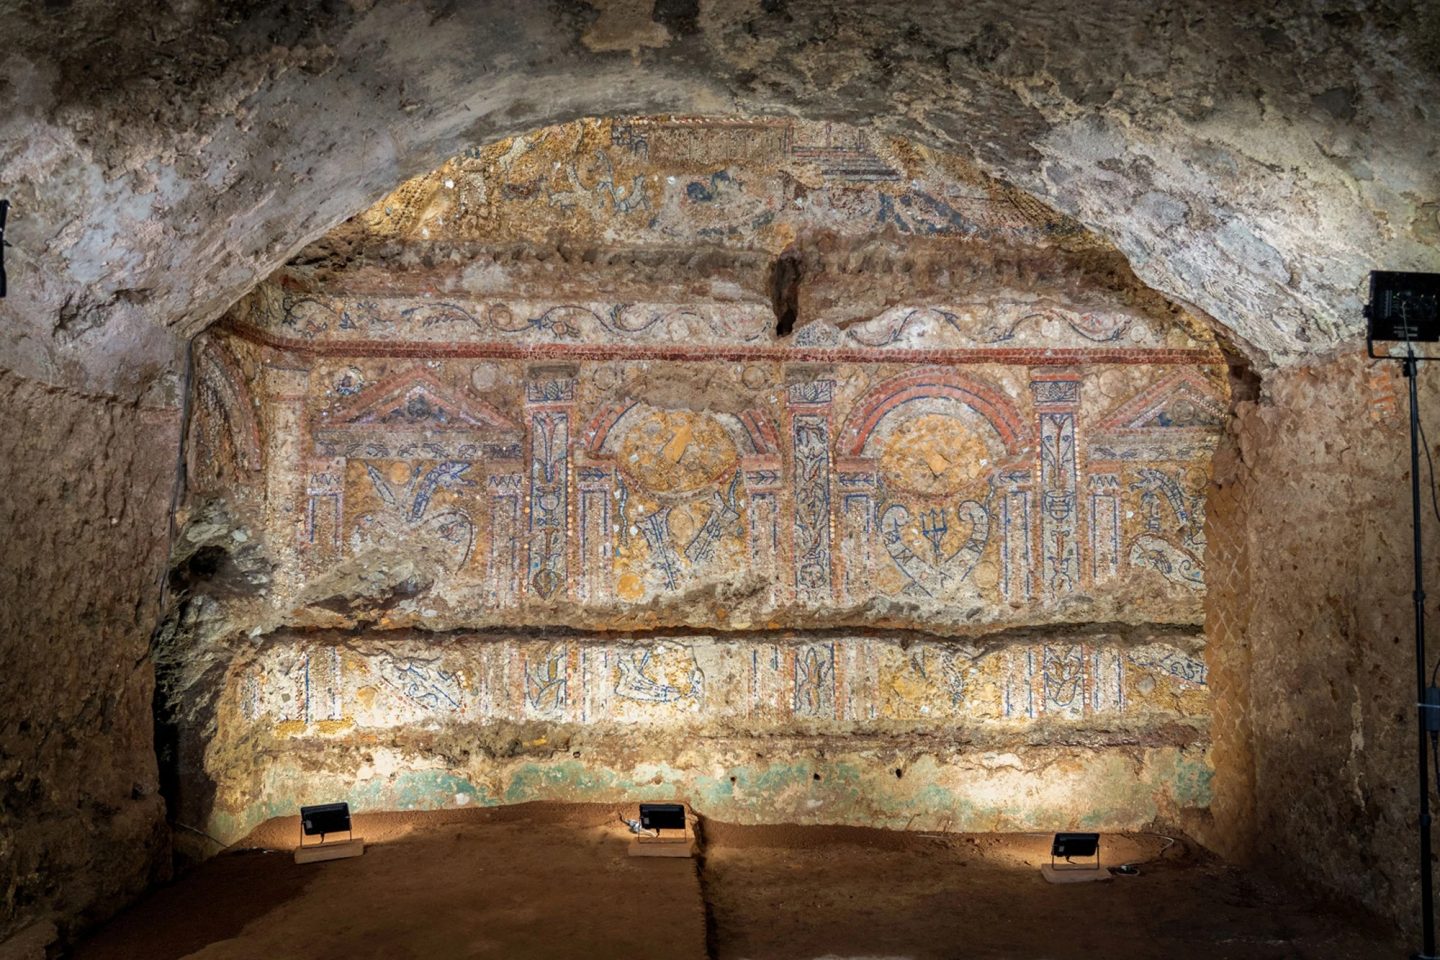 This 2,300-year-old mosaic made of shells and coral has just been found buried under Rome